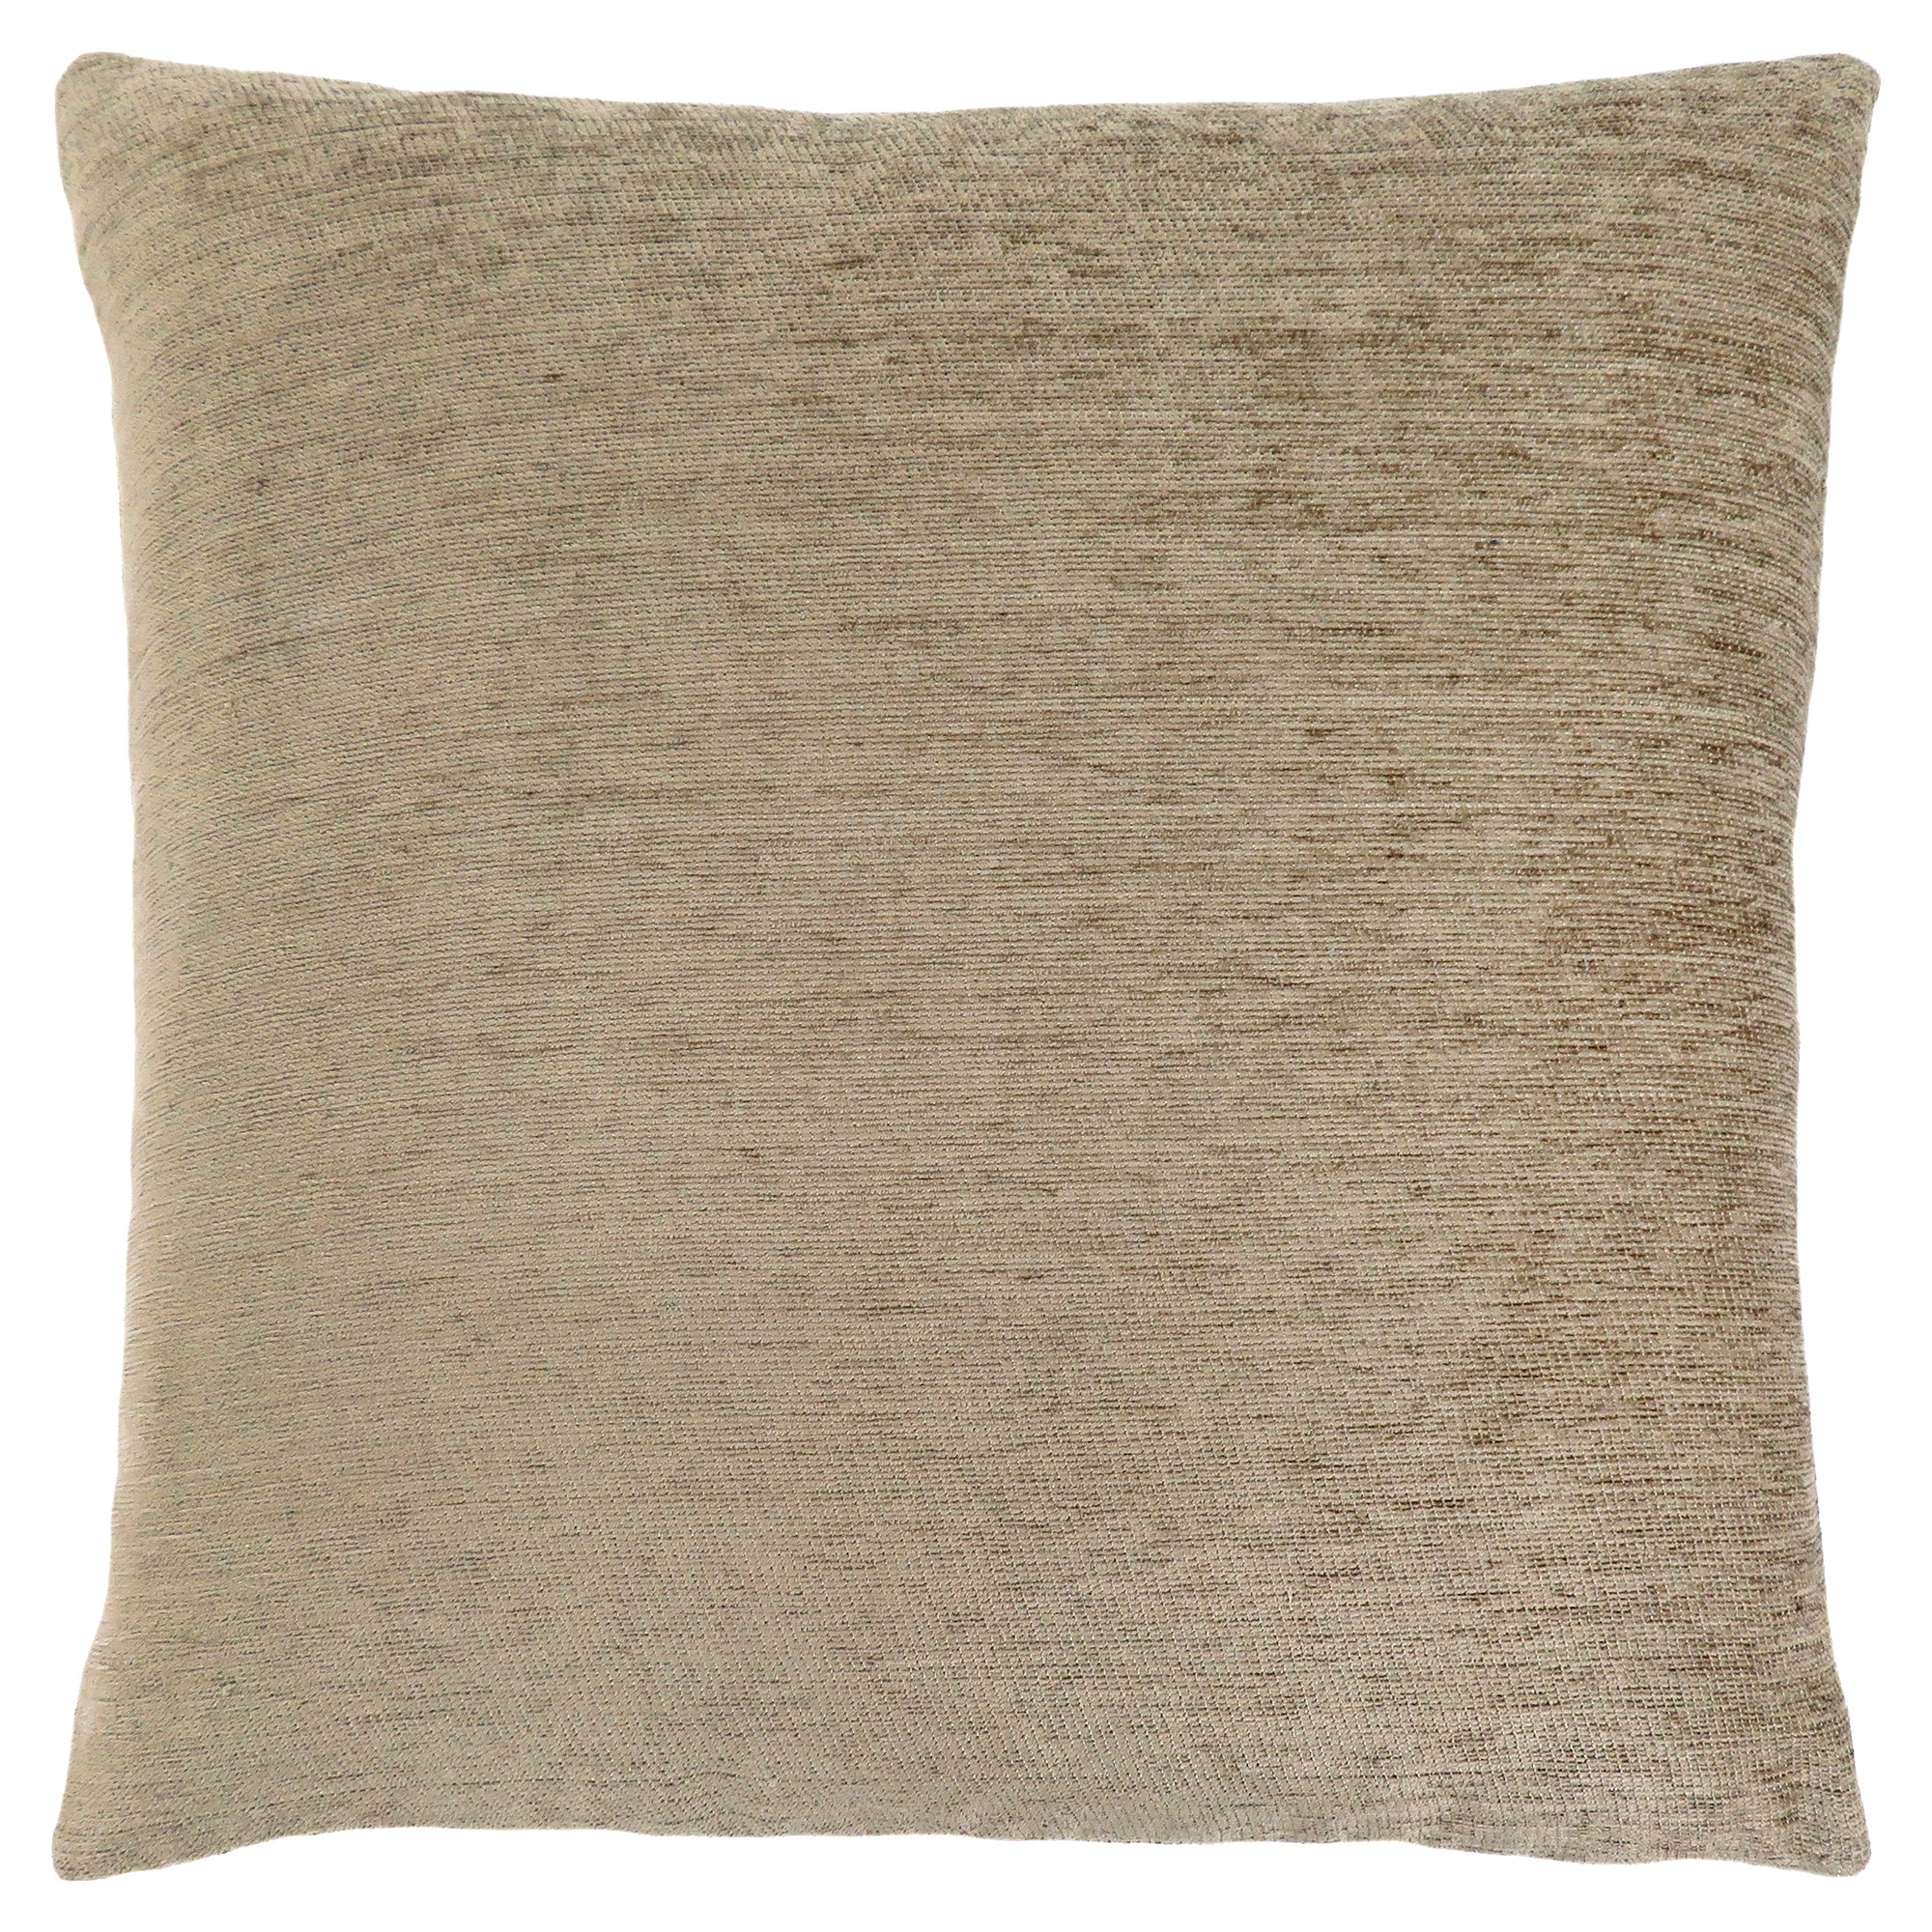 MN-859296    Pillows, 18 X 18 Square, Insert Included, Decorative Throw, Accent, Sofa, Couch, Bed, Soft Polyester Fabric, Hypoallergenic Soft Polyester Insert, Solid Tan, Casual